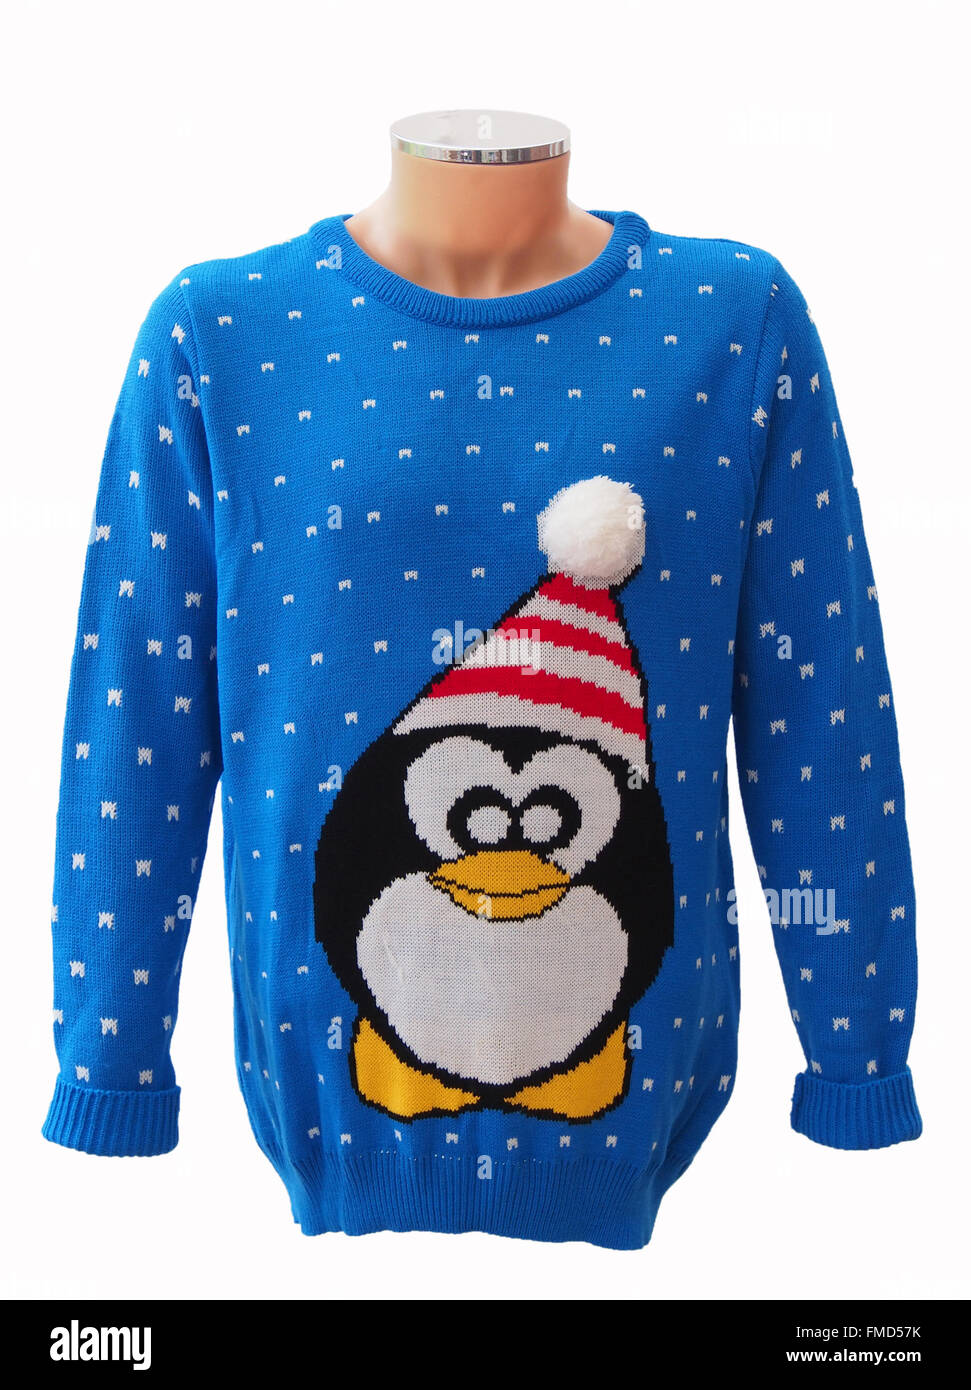 Blue knitted adults' Christmas jumper on a mannequin, featuring a penguin and snowflakes, isolated on a white background. Stock Photo